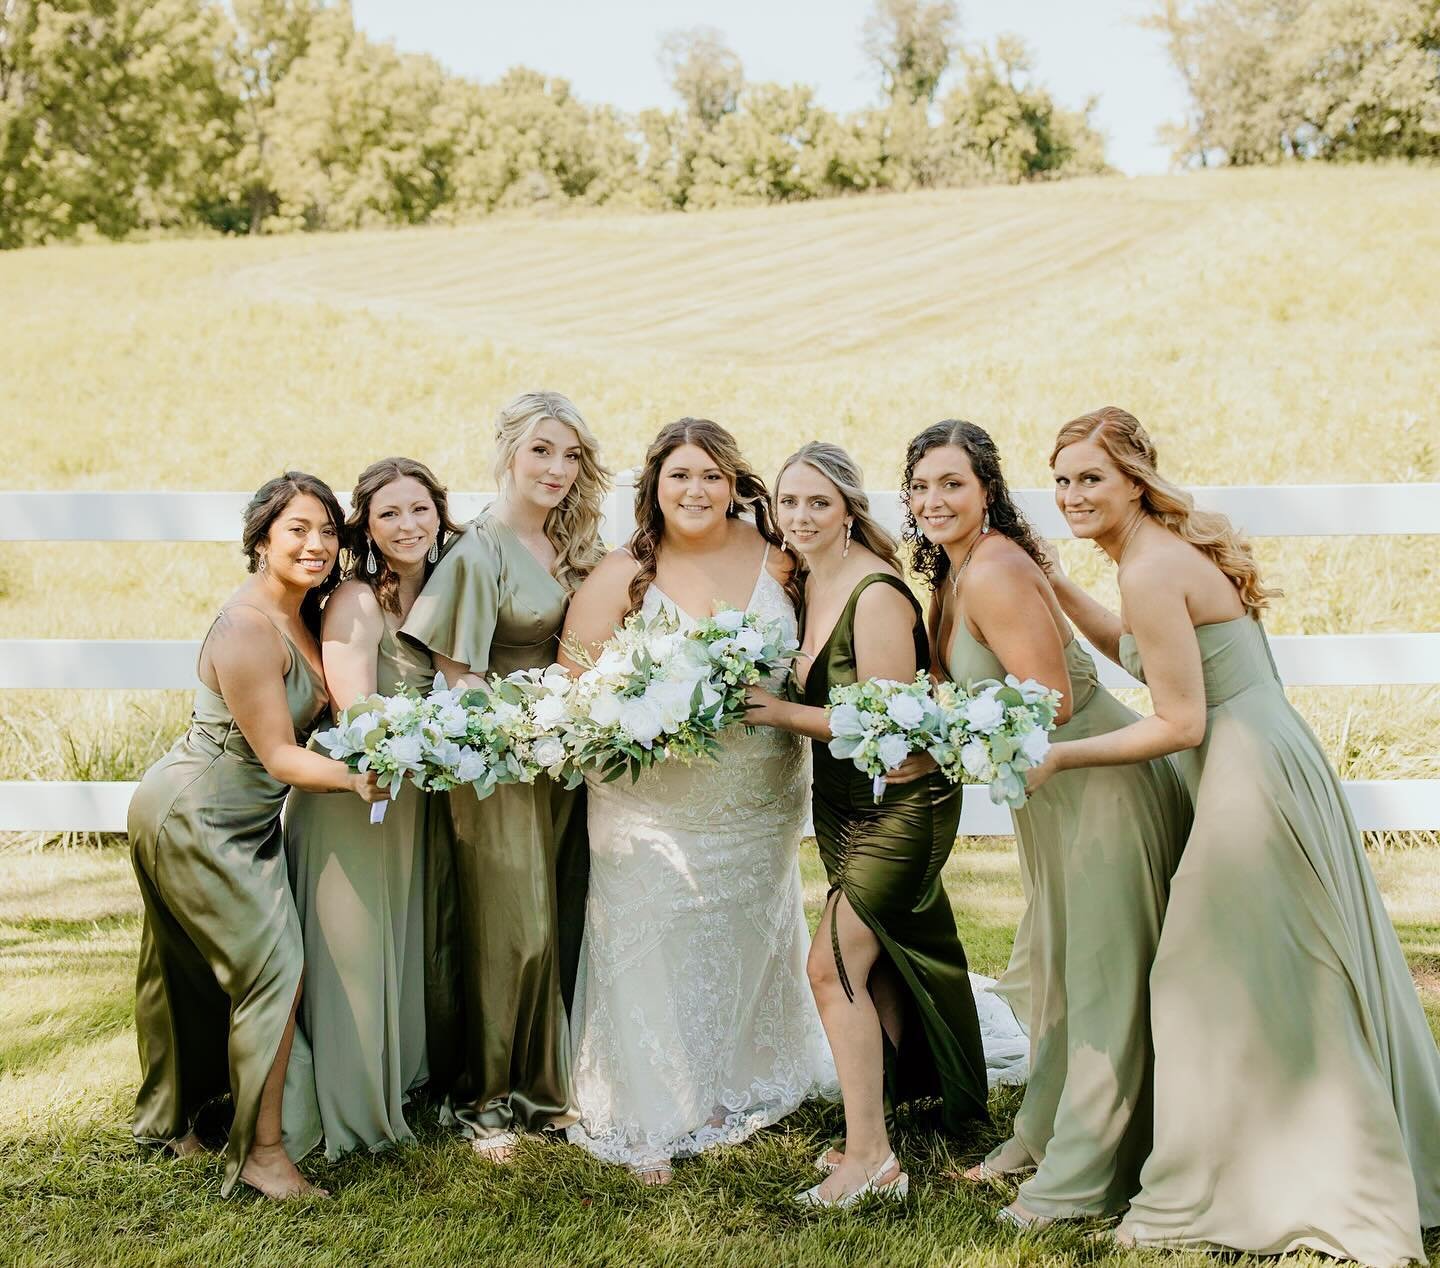 A bunch of stunners! This wedding party was so fun to work with. I love the backdrop of these pretty photos! 🌾🌿🌼

makeup: @kate_makeup_artistry 
venue: @bluestoneestate 
photos: @bodnarfilmco 
hair: @tousledbeautyco / @brittanylynnbridal 
bride: @